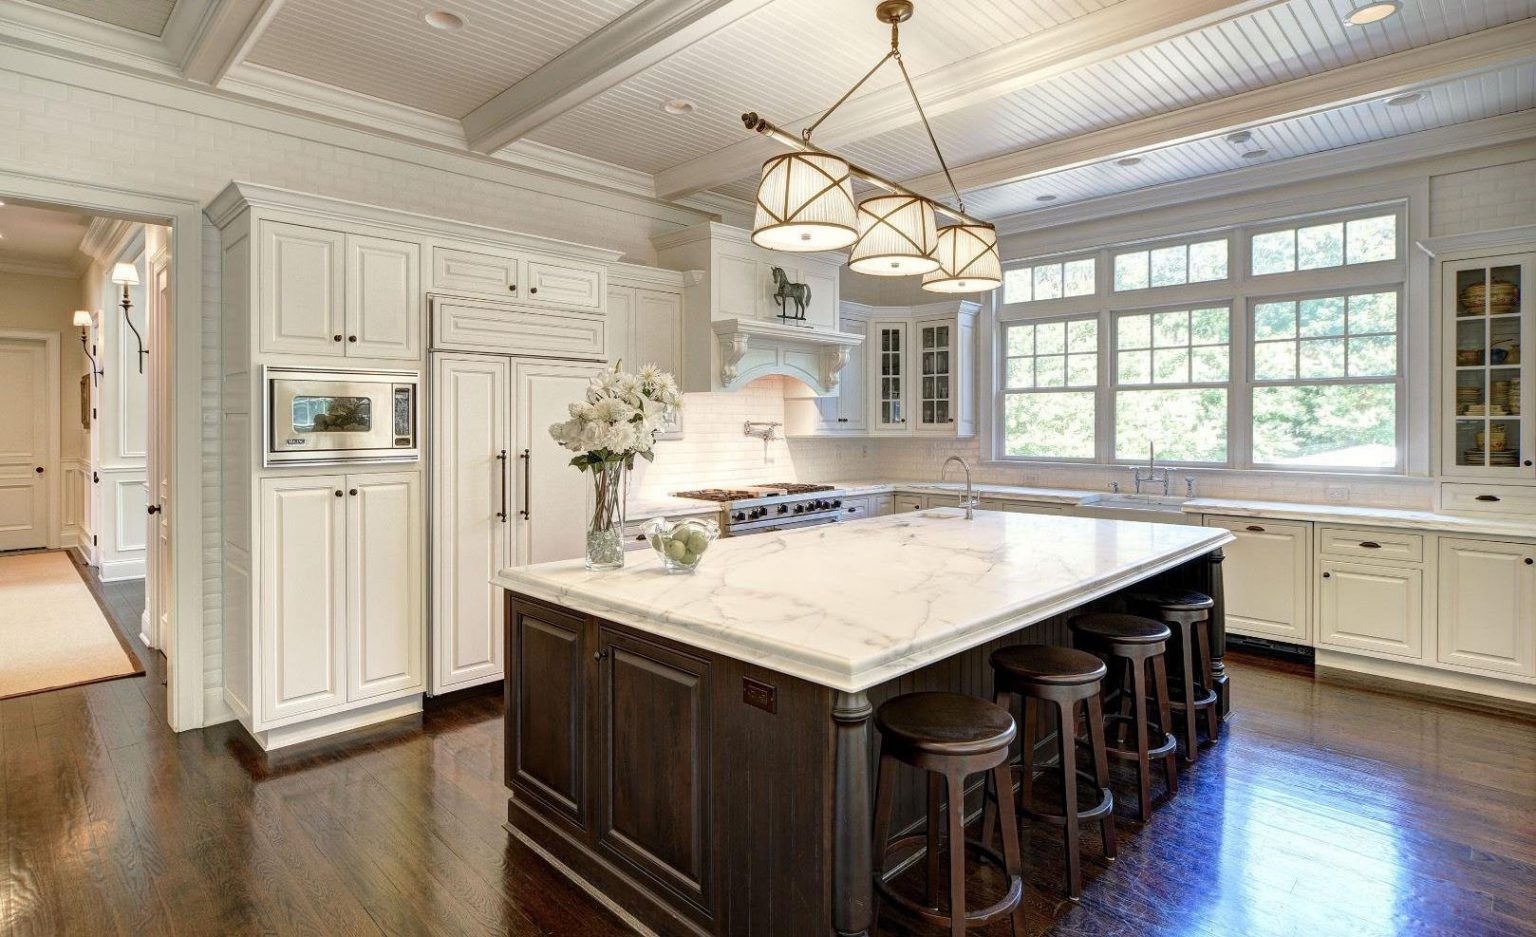 Two-tone Kitchens: 8 Ideas For Cabinets And Islands In Two Colors